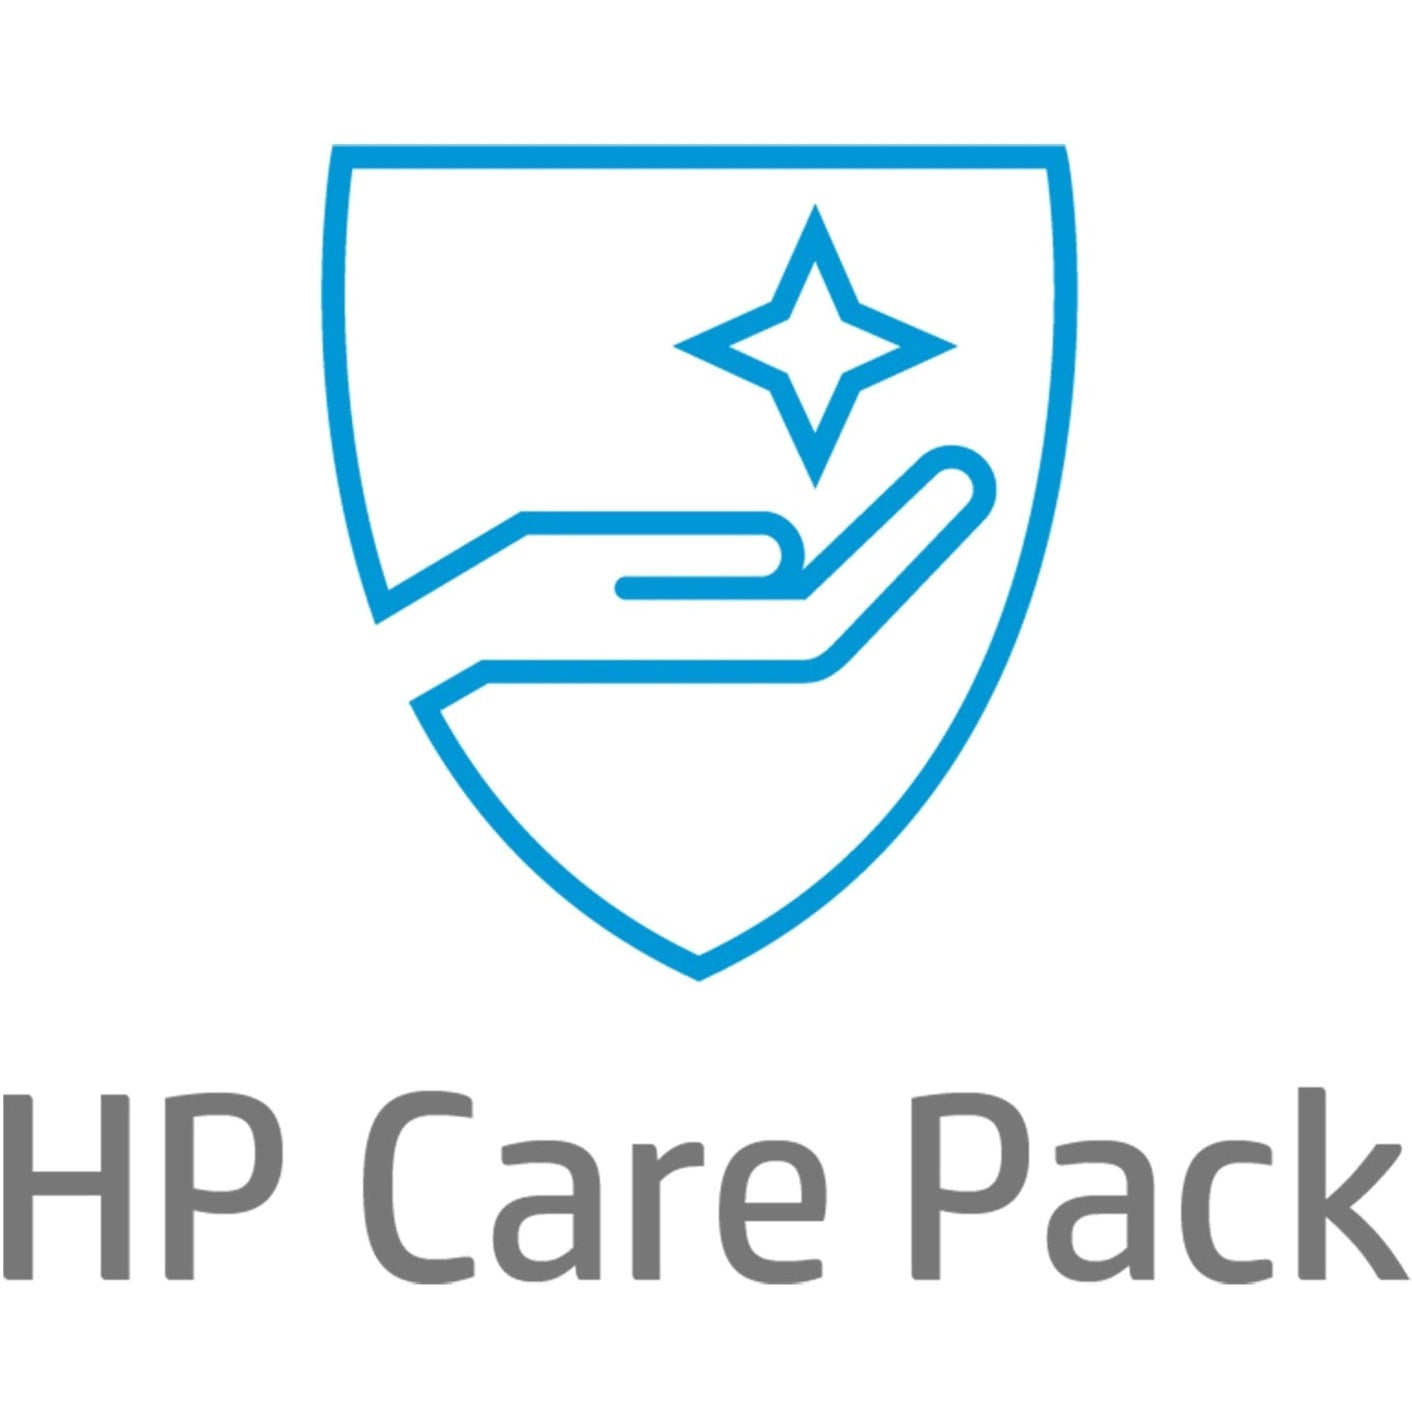 HP Care Pack Hardware Support - 4 Year - Service (UJ392E)